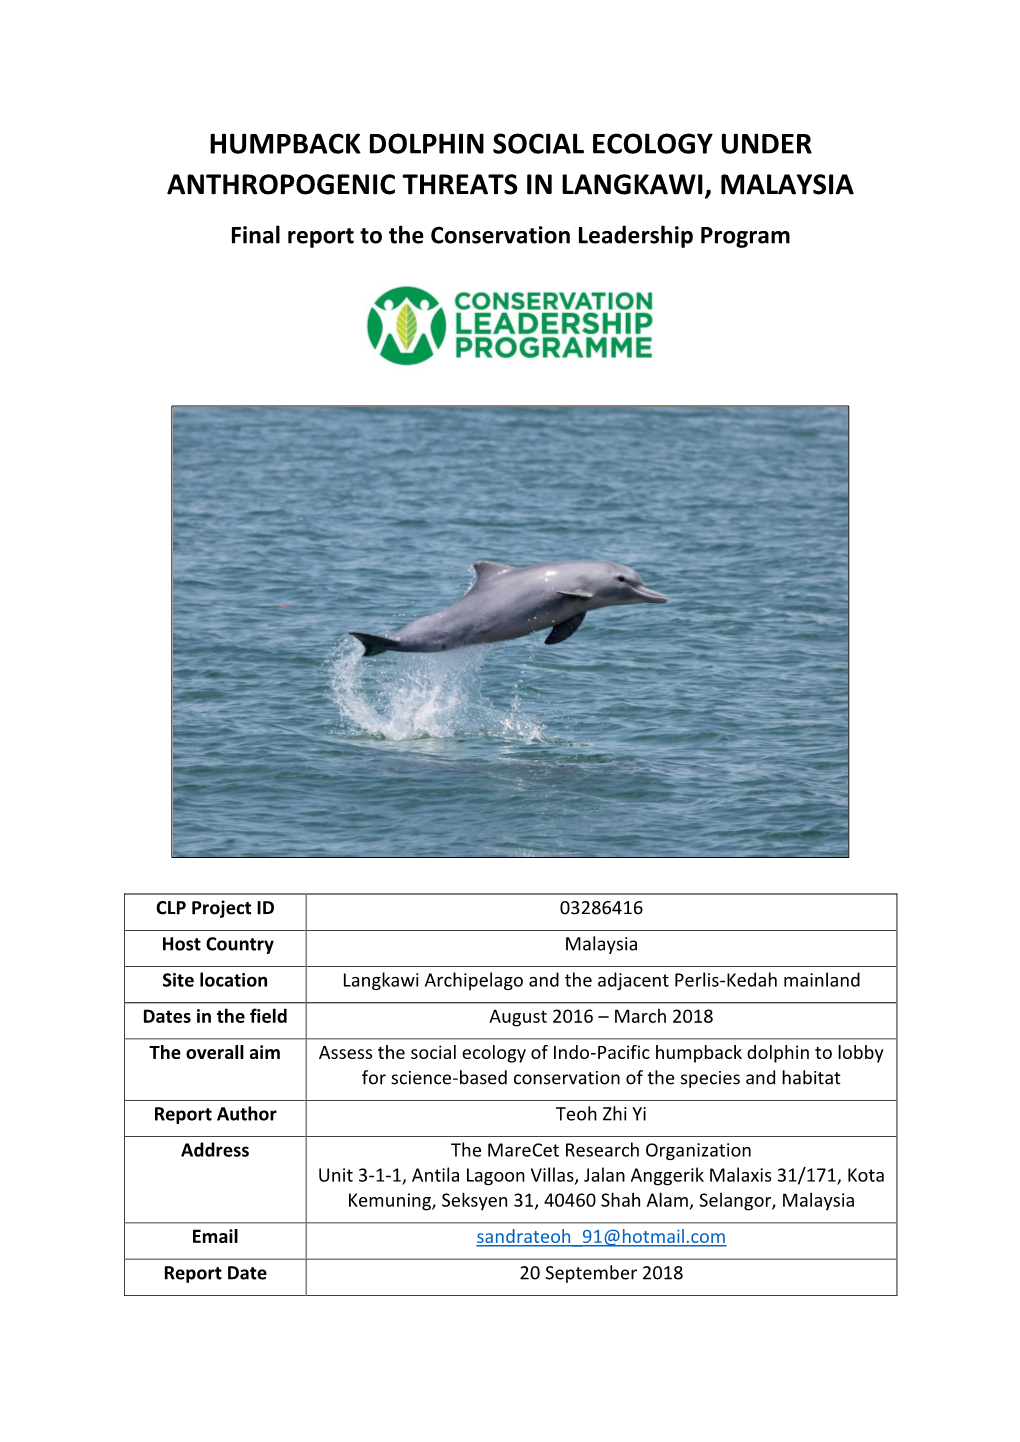 HUMPBACK DOLPHIN SOCIAL ECOLOGY UNDER ANTHROPOGENIC THREATS in LANGKAWI, MALAYSIA Final Report to the Conservation Leadership Program